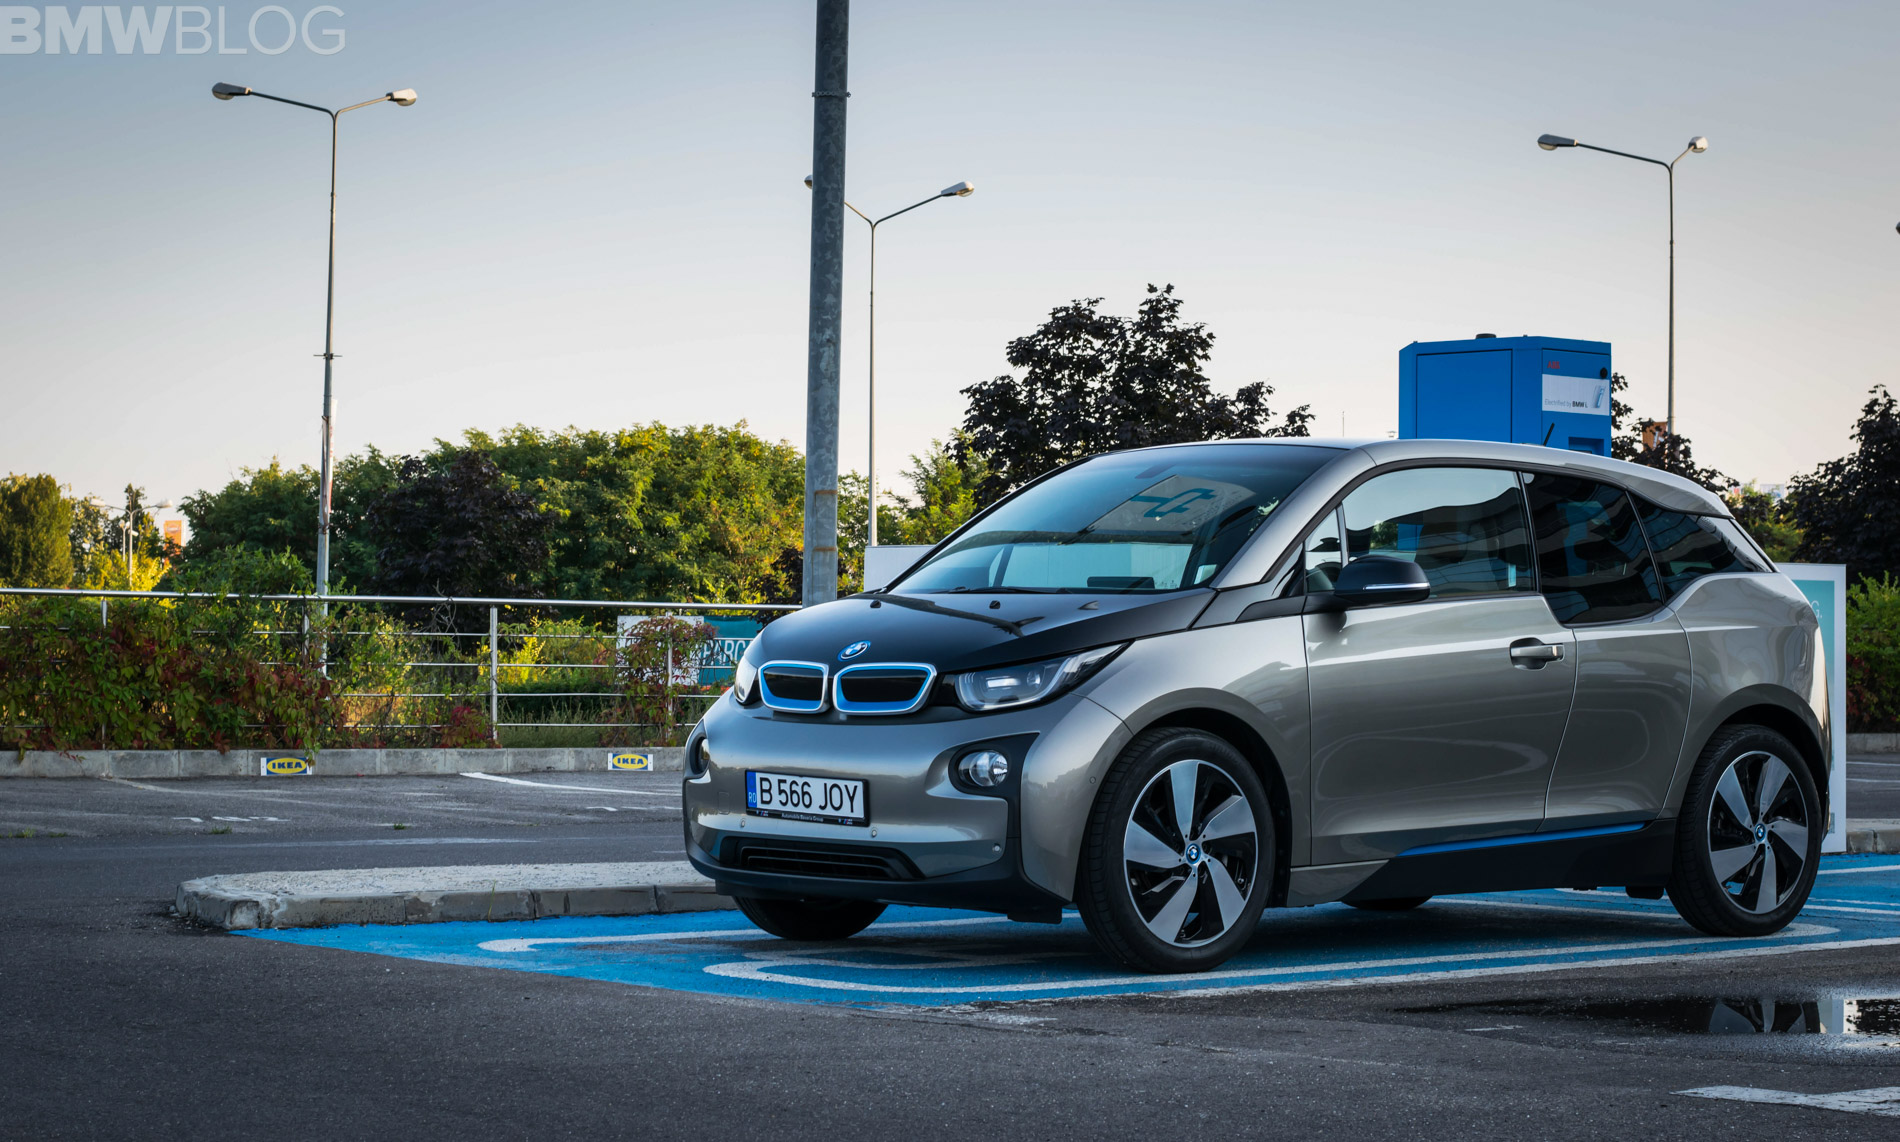 Pre-Owned Electric — Should You Buy a Used BMW i3?